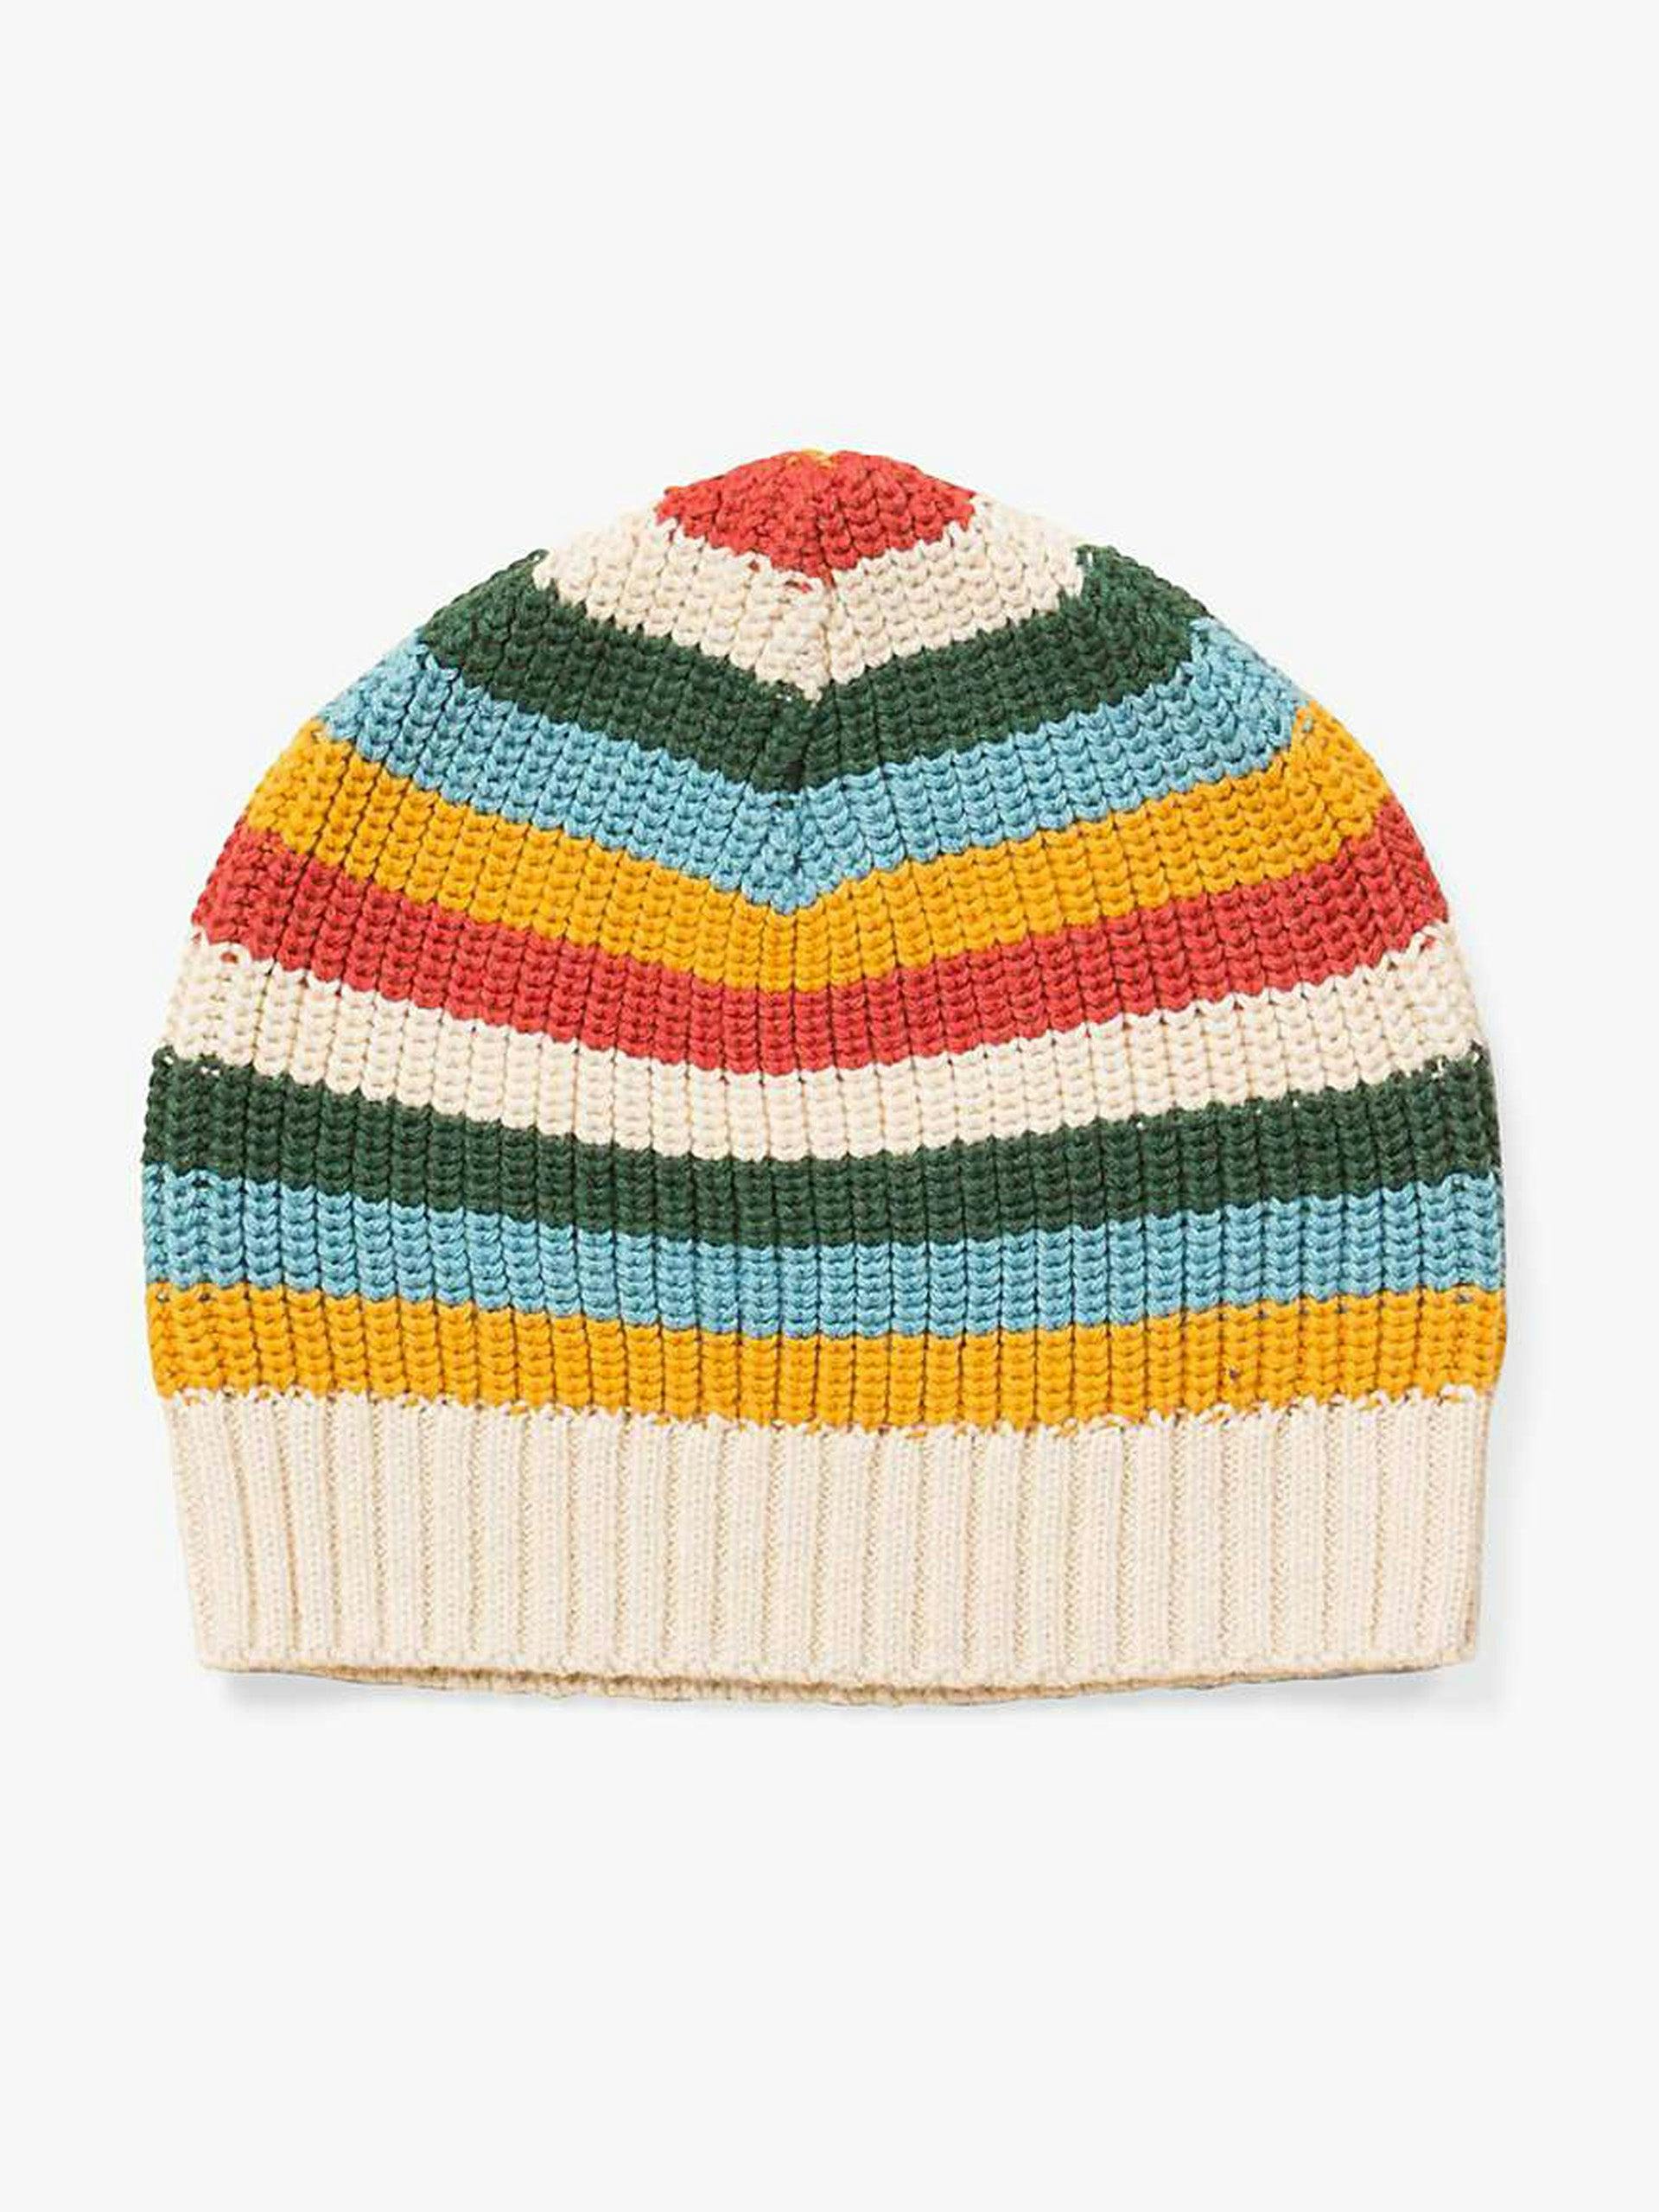 Multi-coloured striped knitted hat